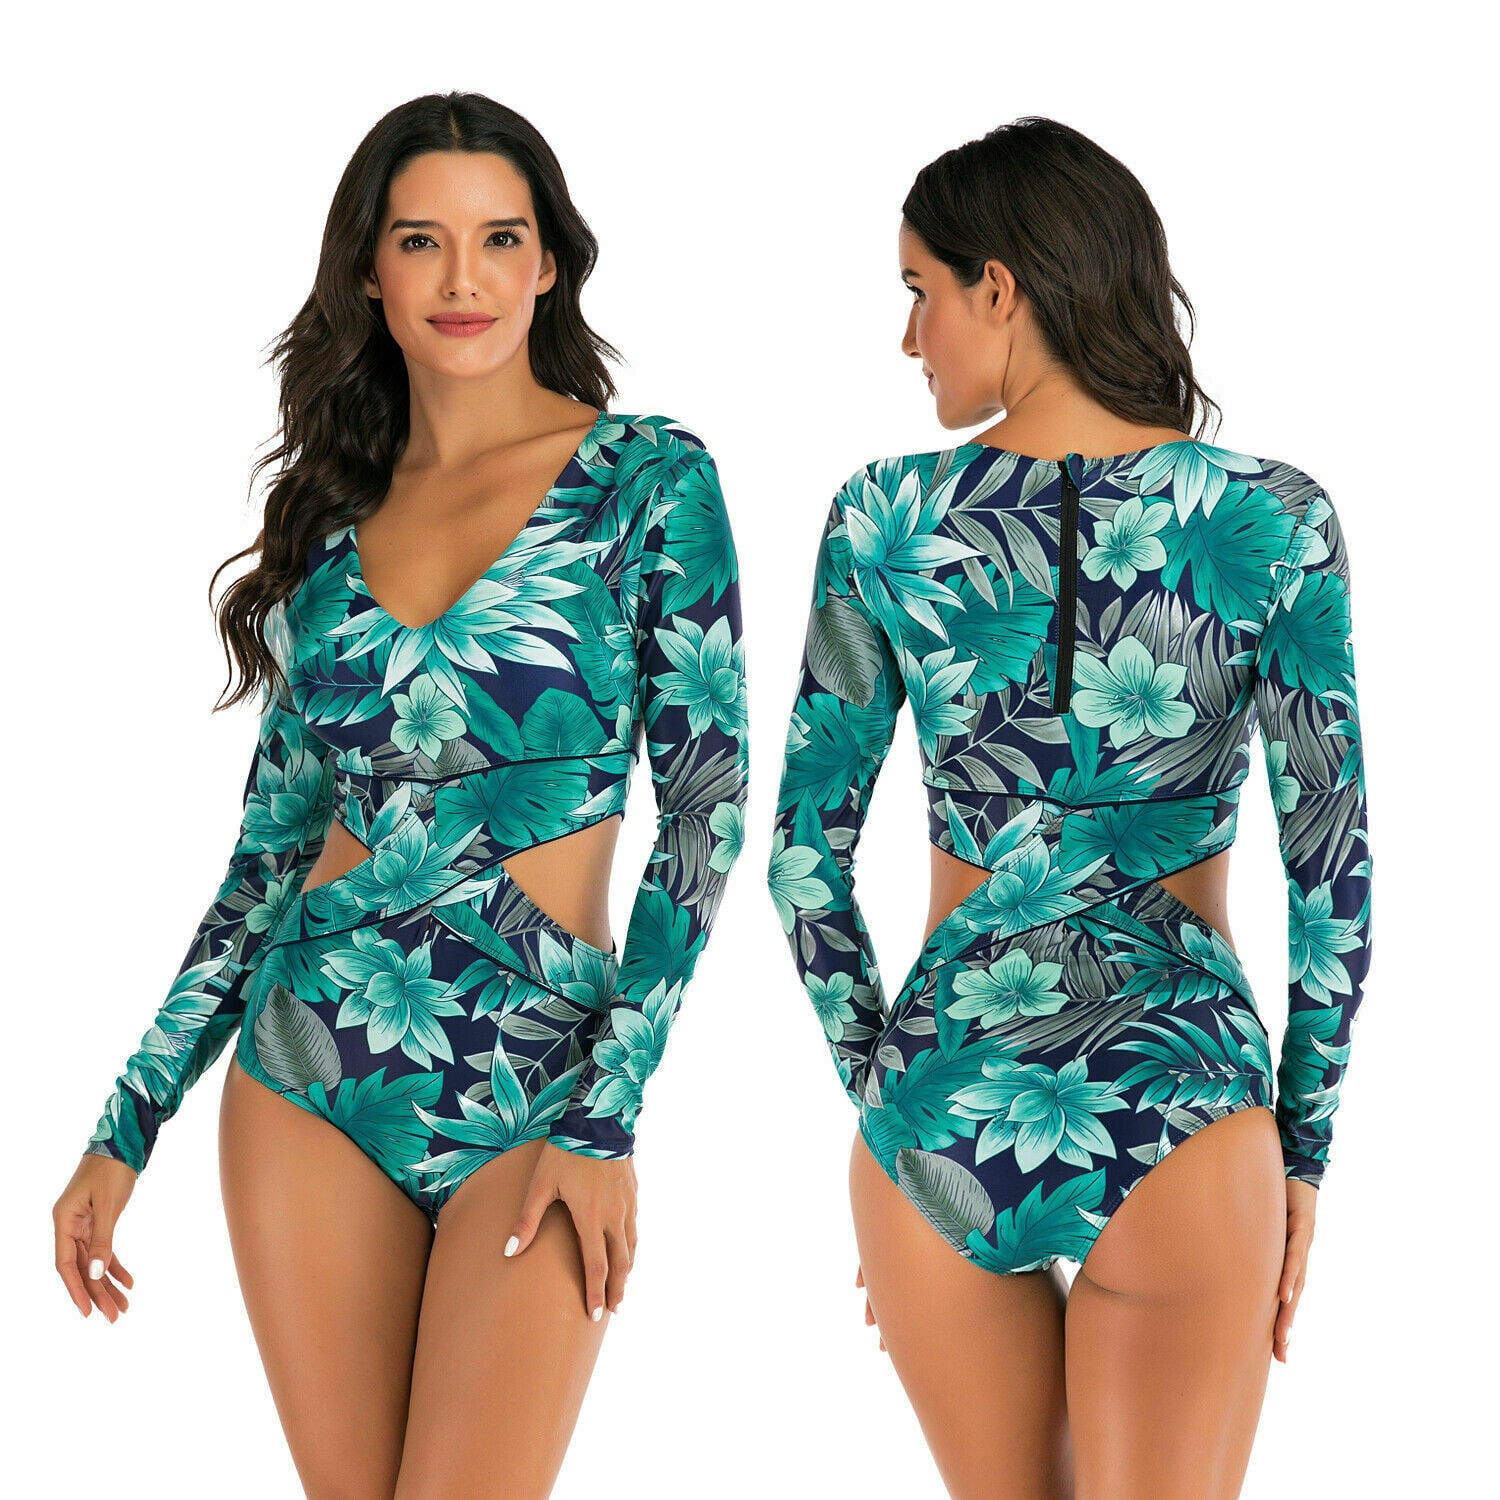 Sun Protection Printed Zipper Surfing Bathing Suit Solid Color Swimwear StyleV Womens Long Sleeve One Piece Swimsuit Rash Guard UV UPF 50